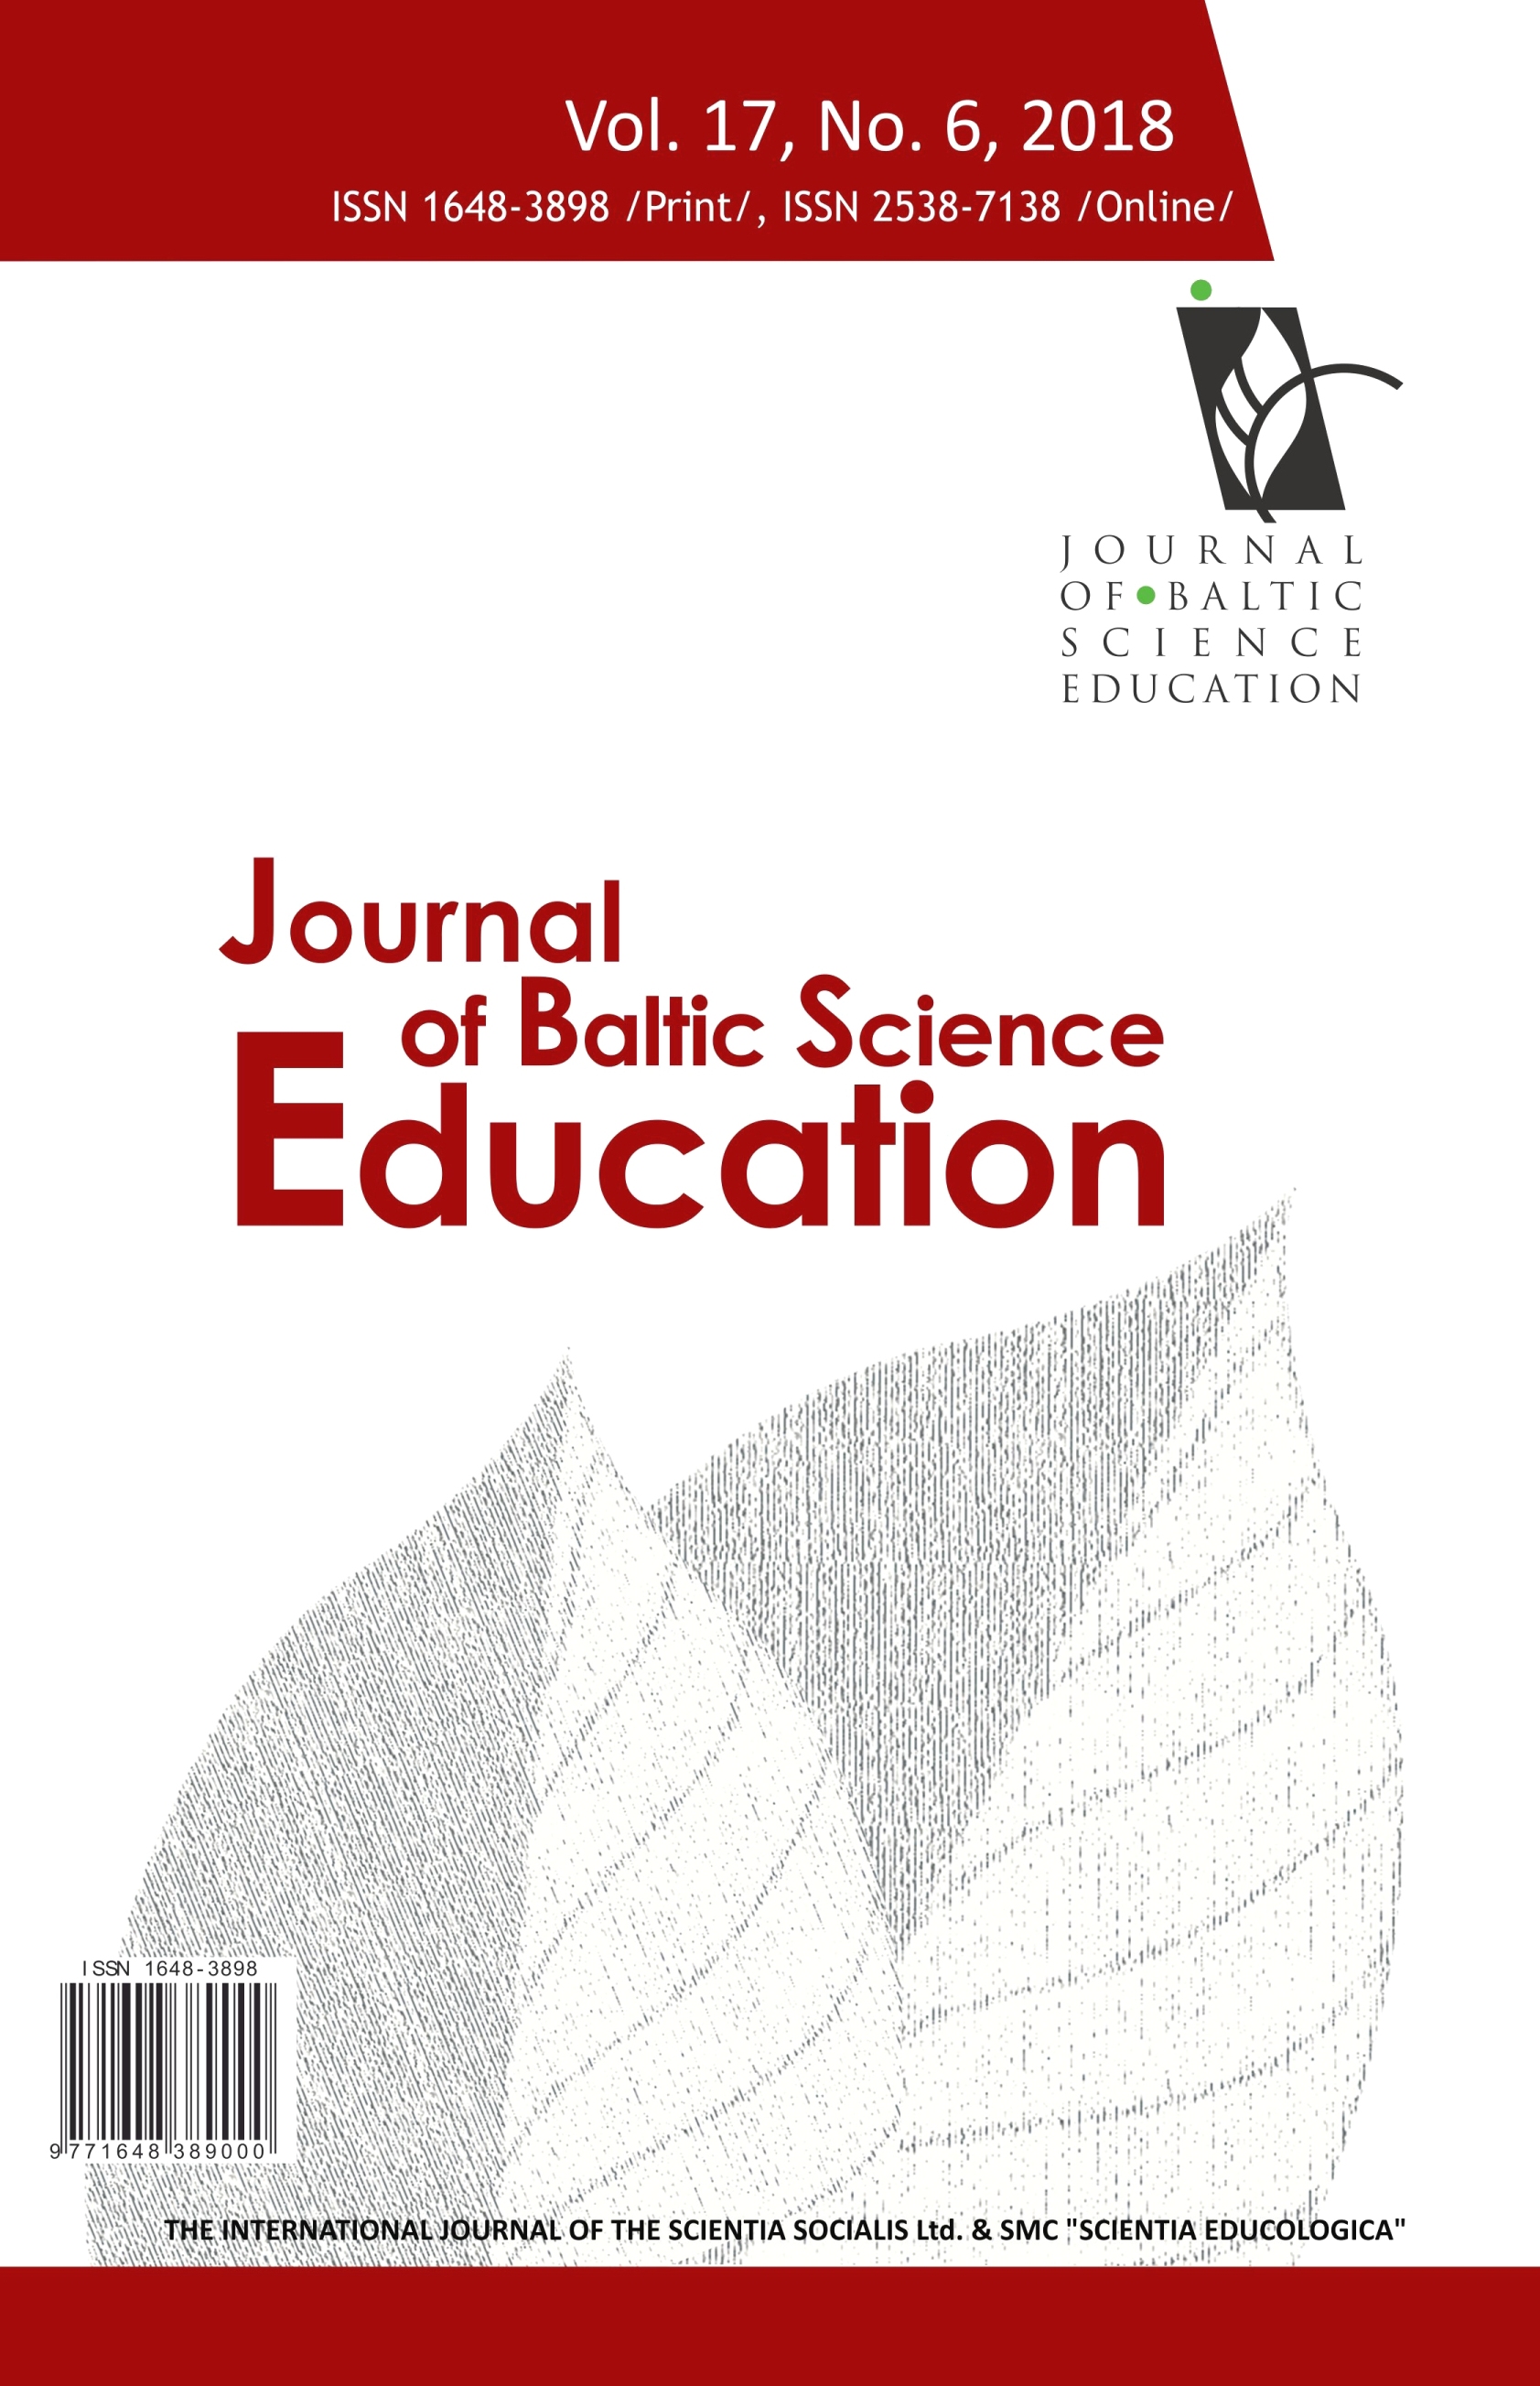 DEVELOPMENT AND EVALUATION OF AN INTEGRATED PROJECT-BASED AND STEM TEACHING AND LEARNING MODULE ON ENHANCING SCIENTIFIC CREATIVITY AMONG FIFTH GRADERS